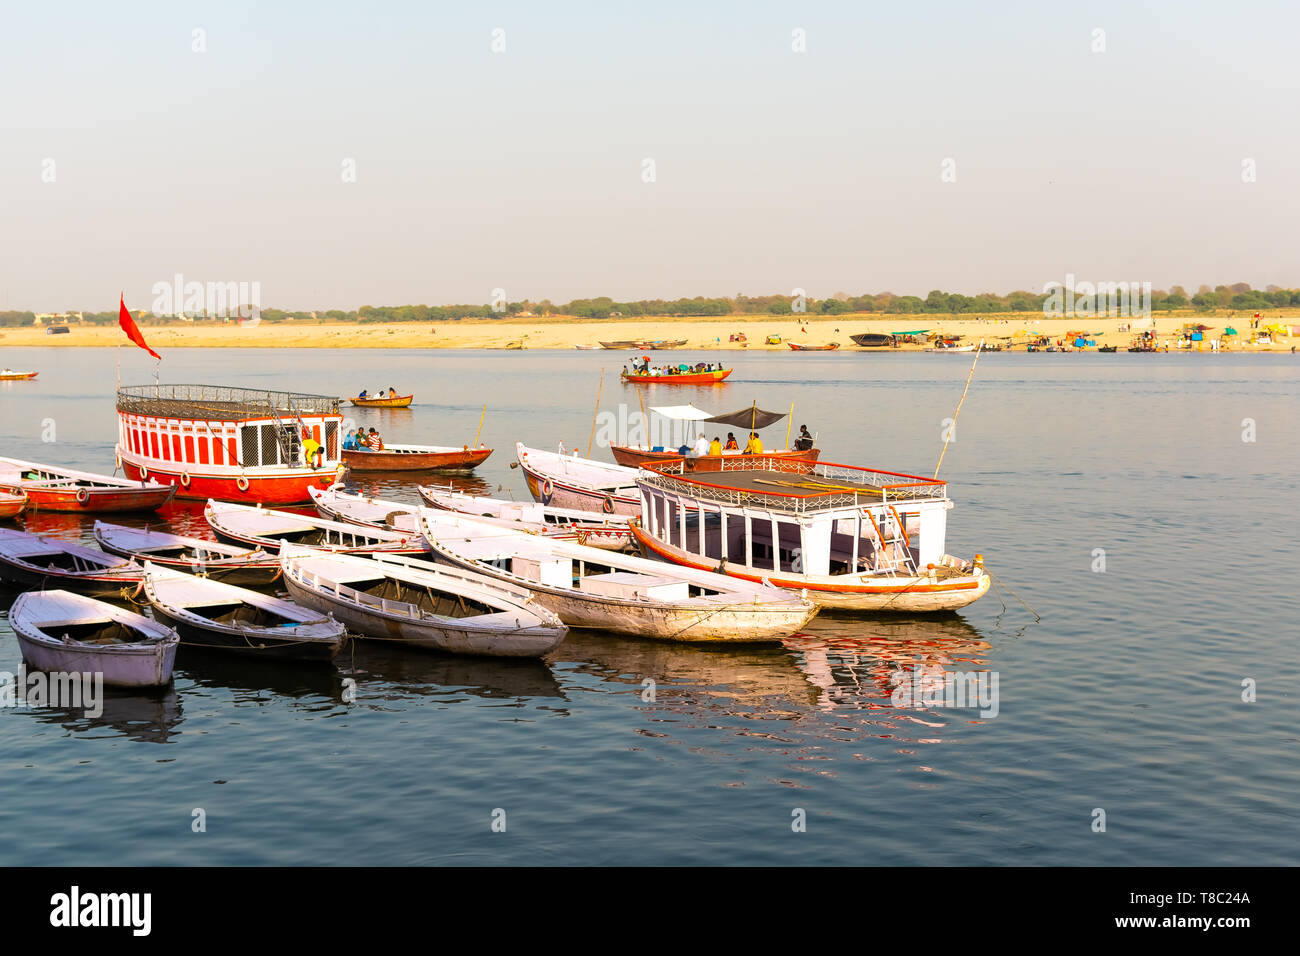 Colorful boats on Ganges river in Varanasi, India. Stock Photo